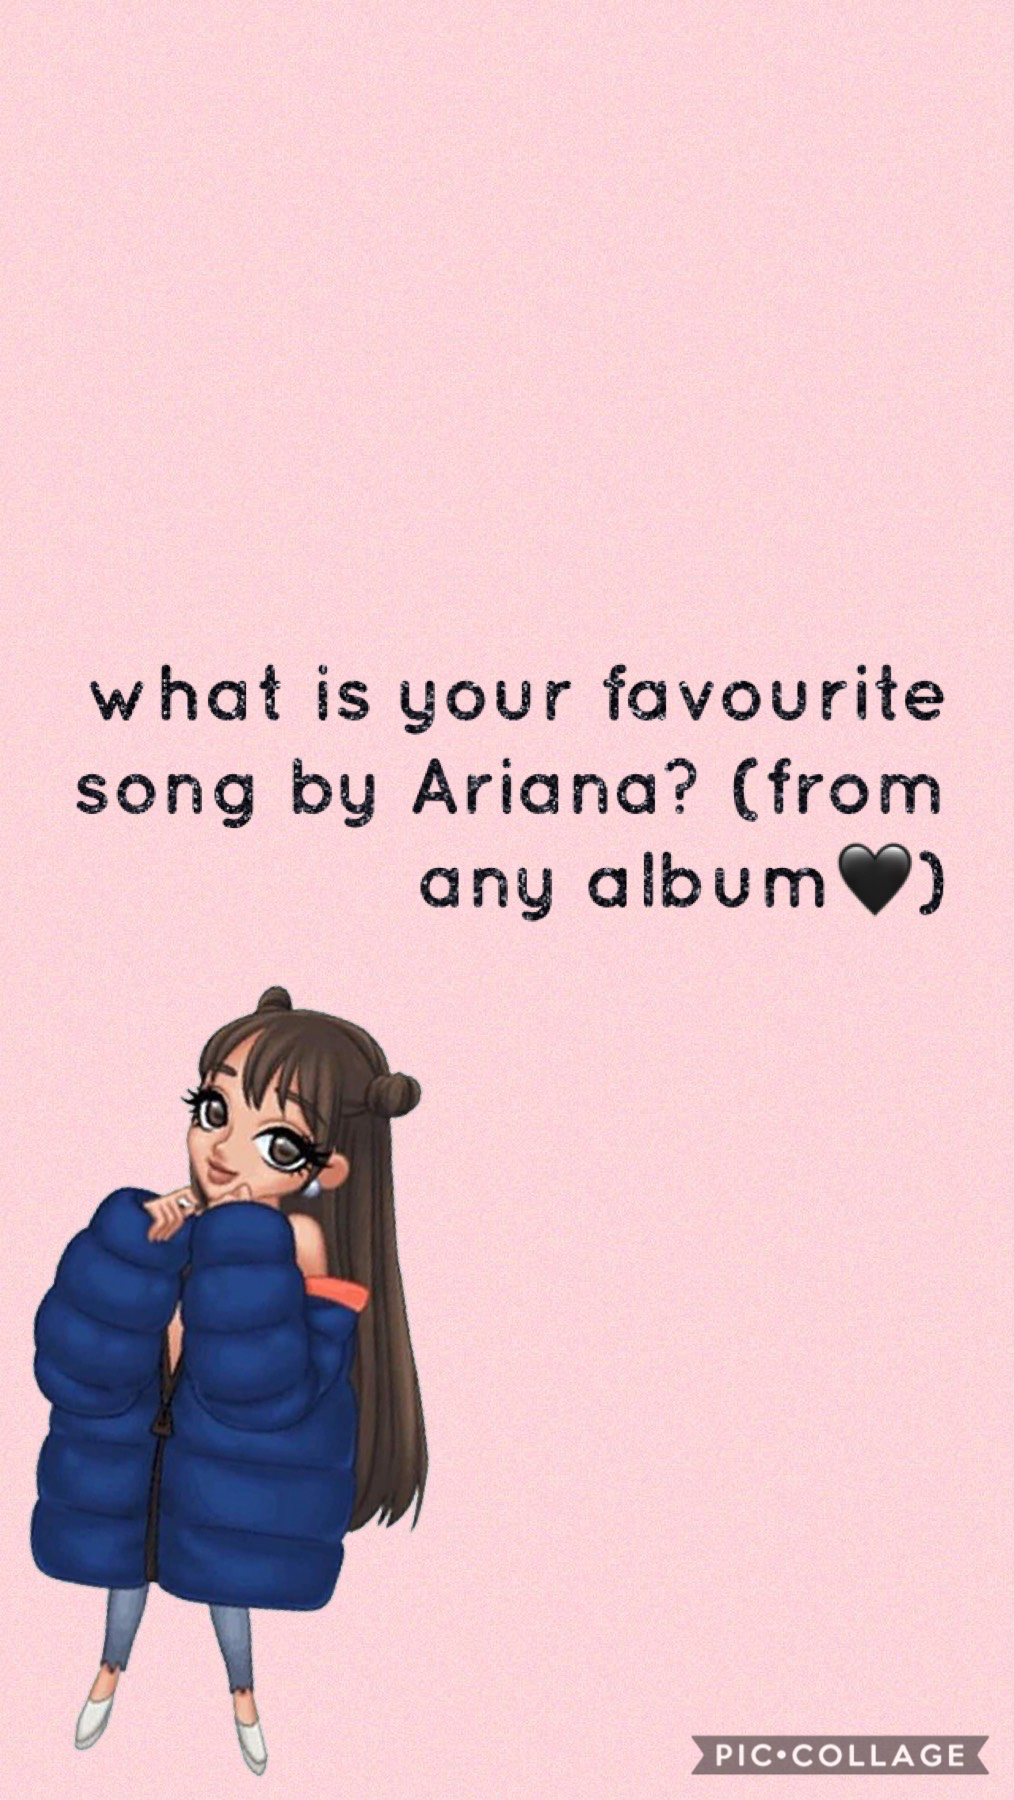 comment! I want to know🧡